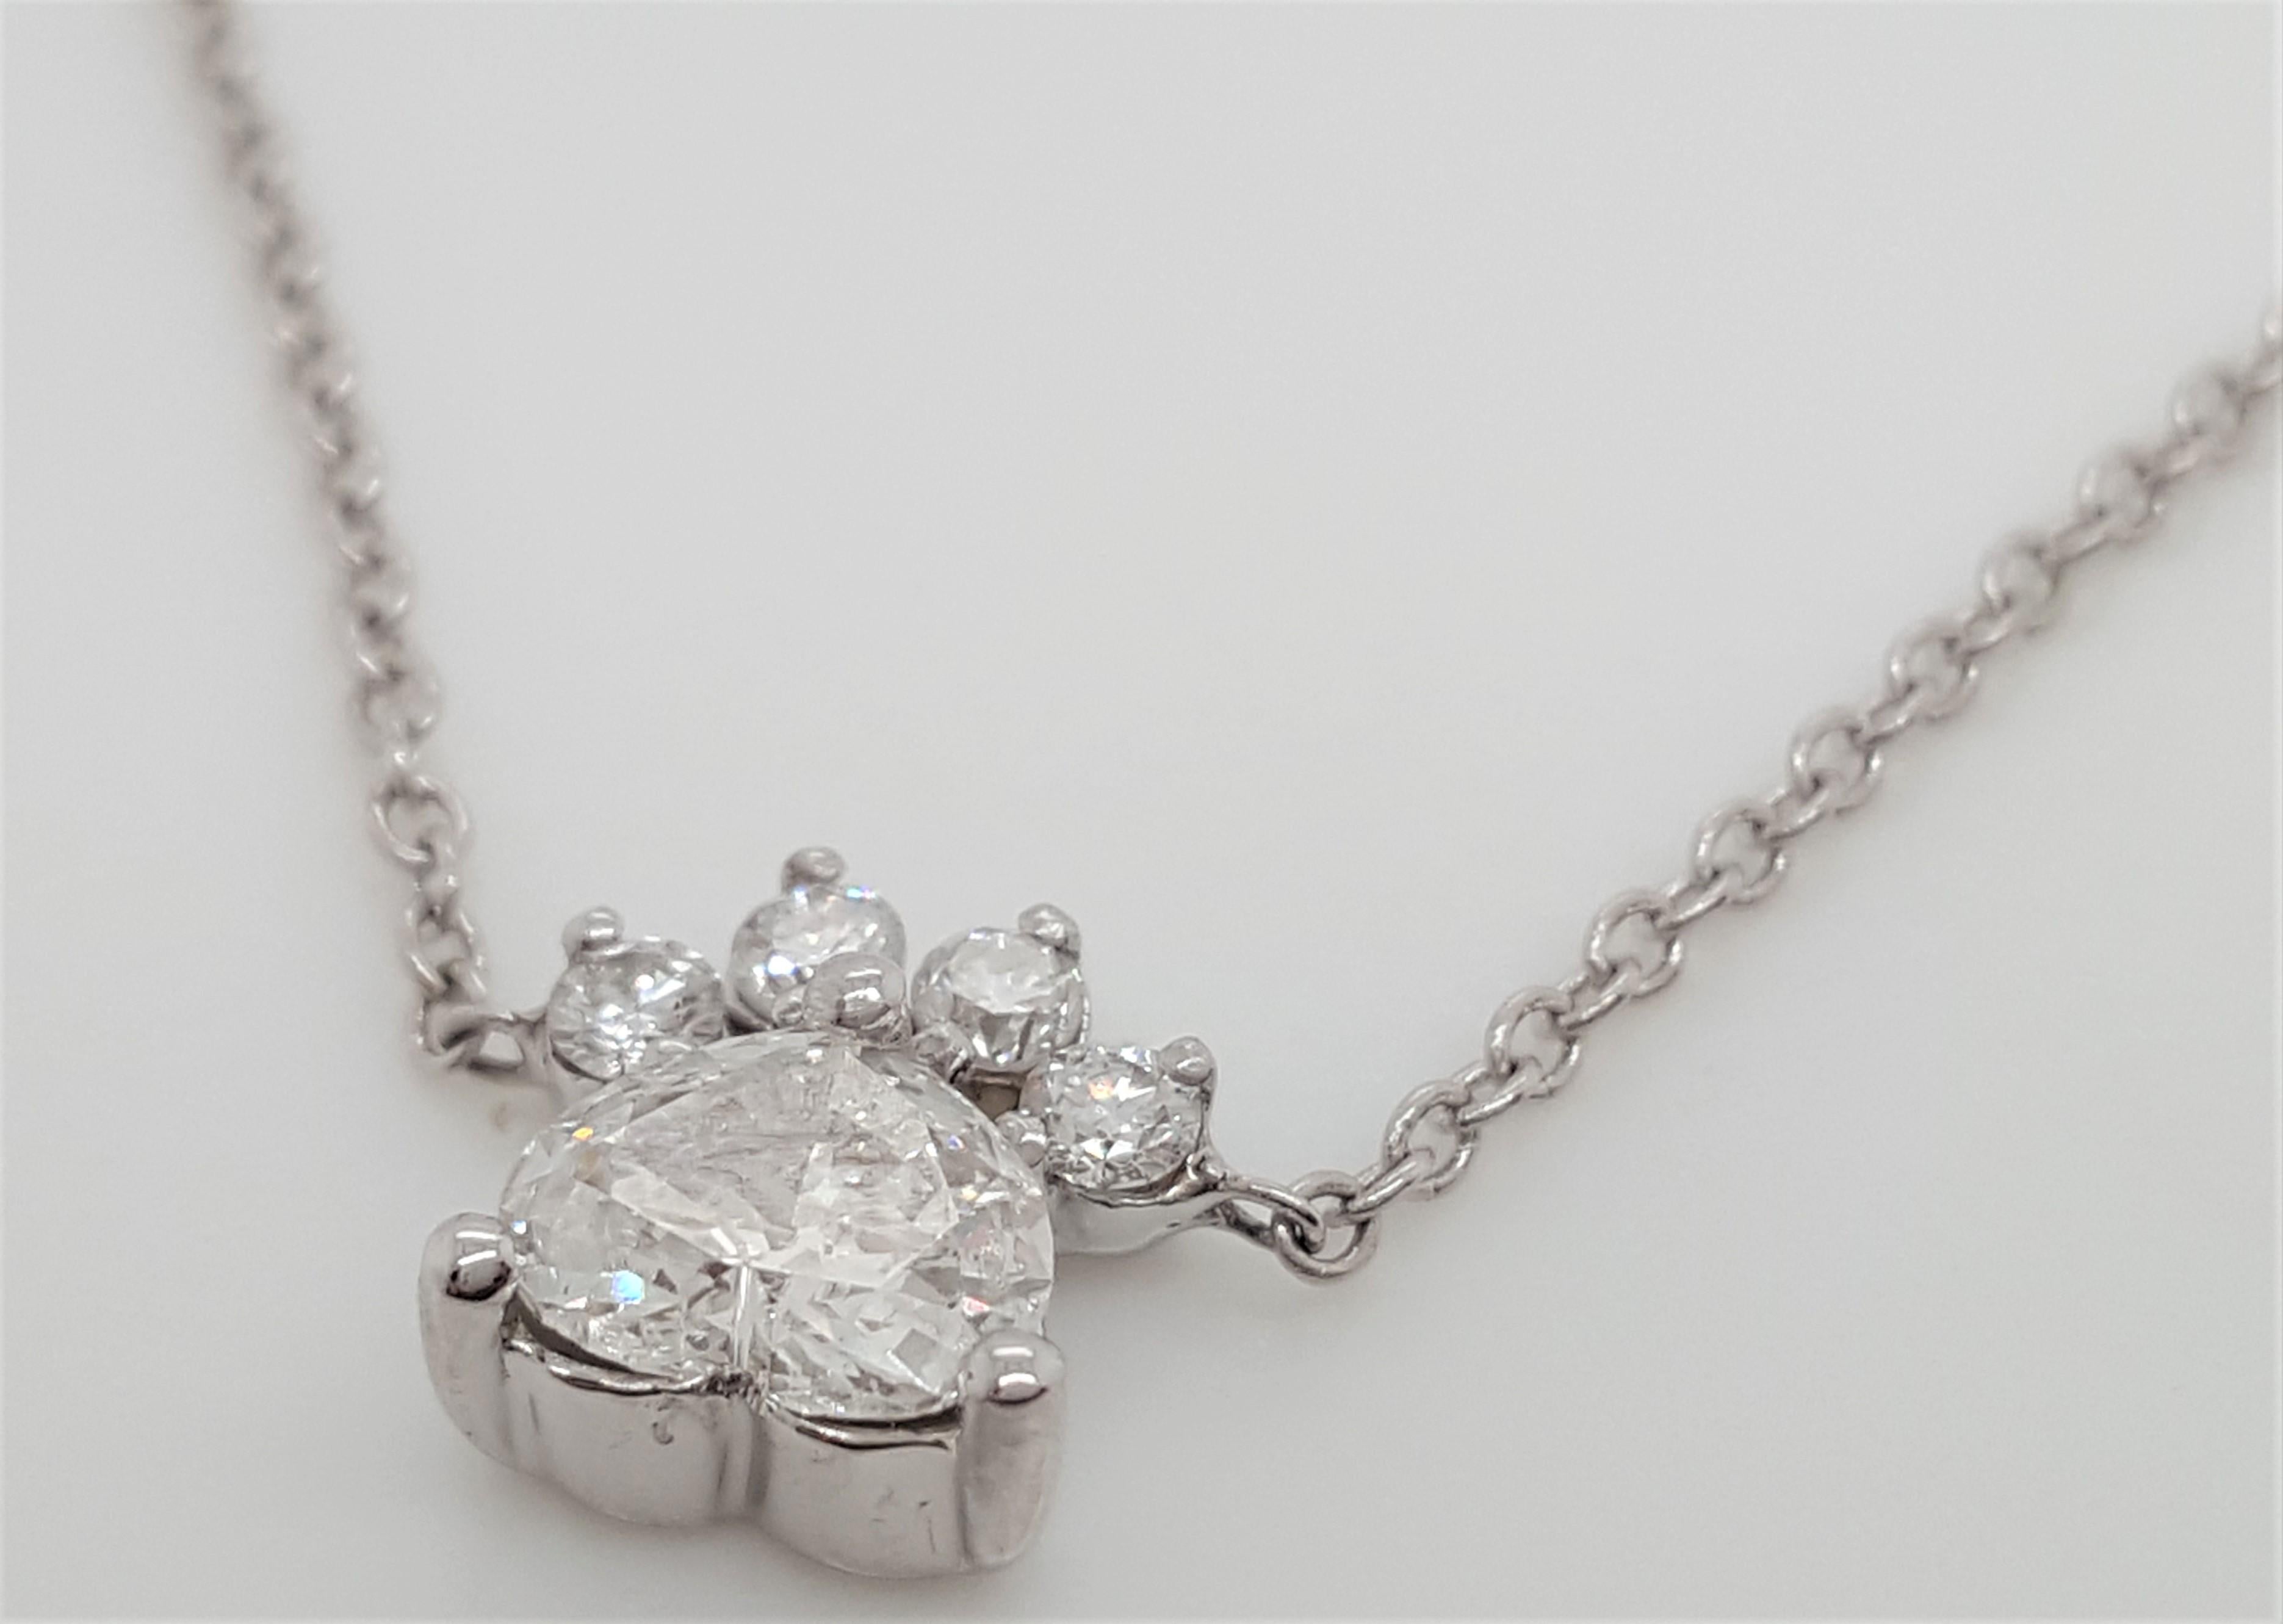 The Dog Paw Pendant Necklace includes a 0.33 carat heart  cut diamond center set in a basket setting hugged by 3 prongs and 4 Round Brilliant Cut Diamonds 0.10 ct tw  It is hanging on a 18K white gold 18” Cable chain. It is the perfect everyday